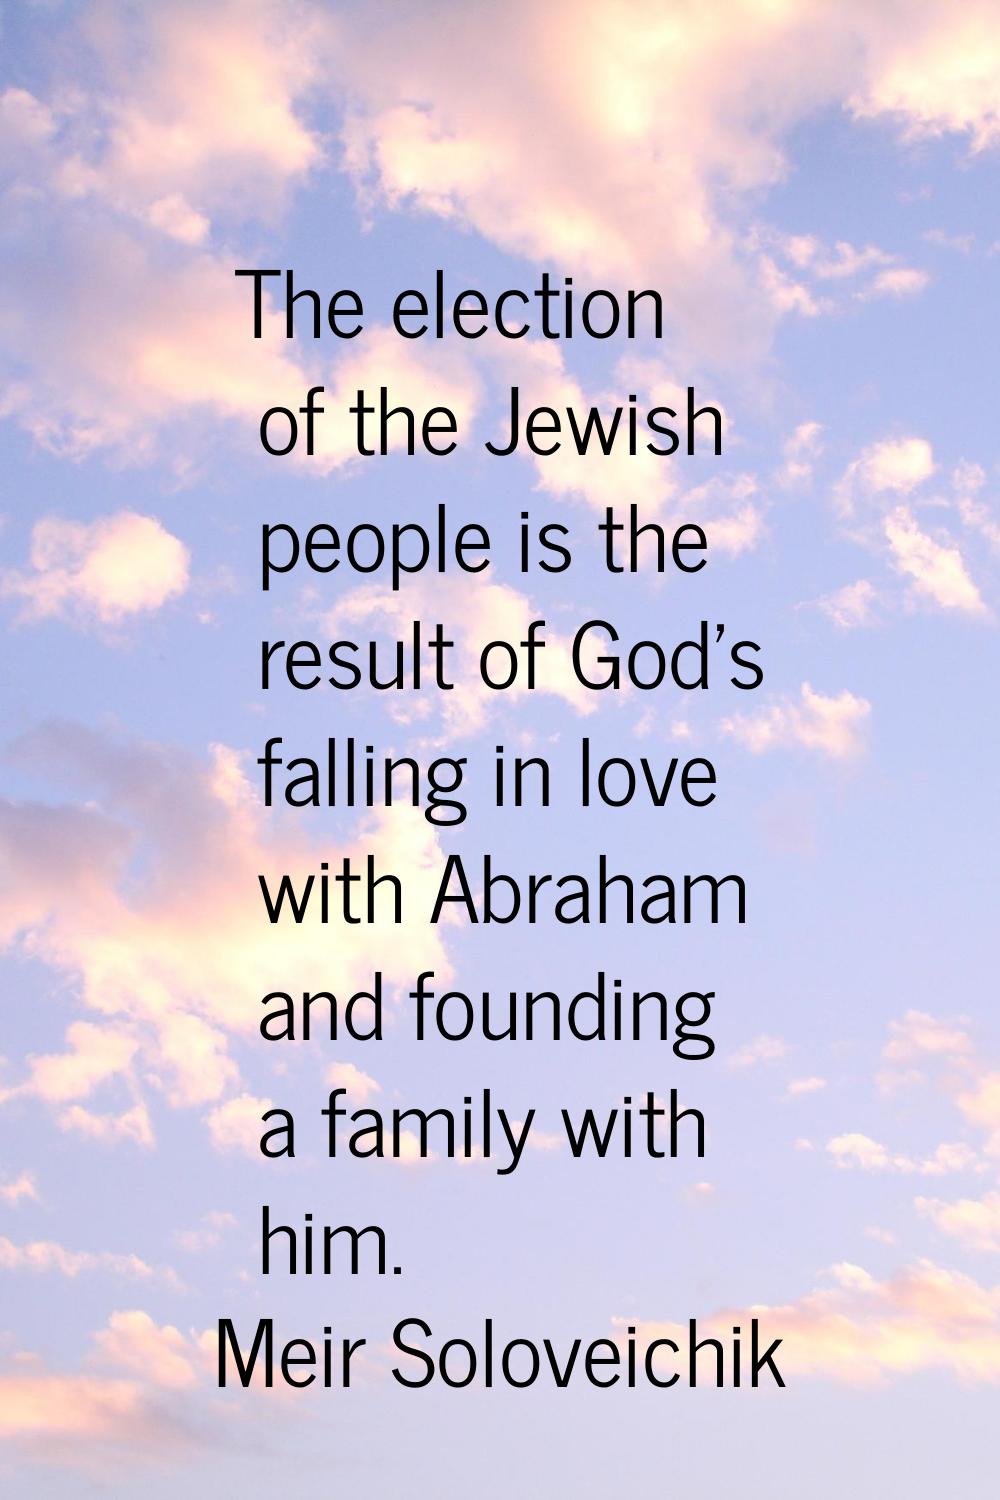 The election of the Jewish people is the result of God's falling in love with Abraham and founding 